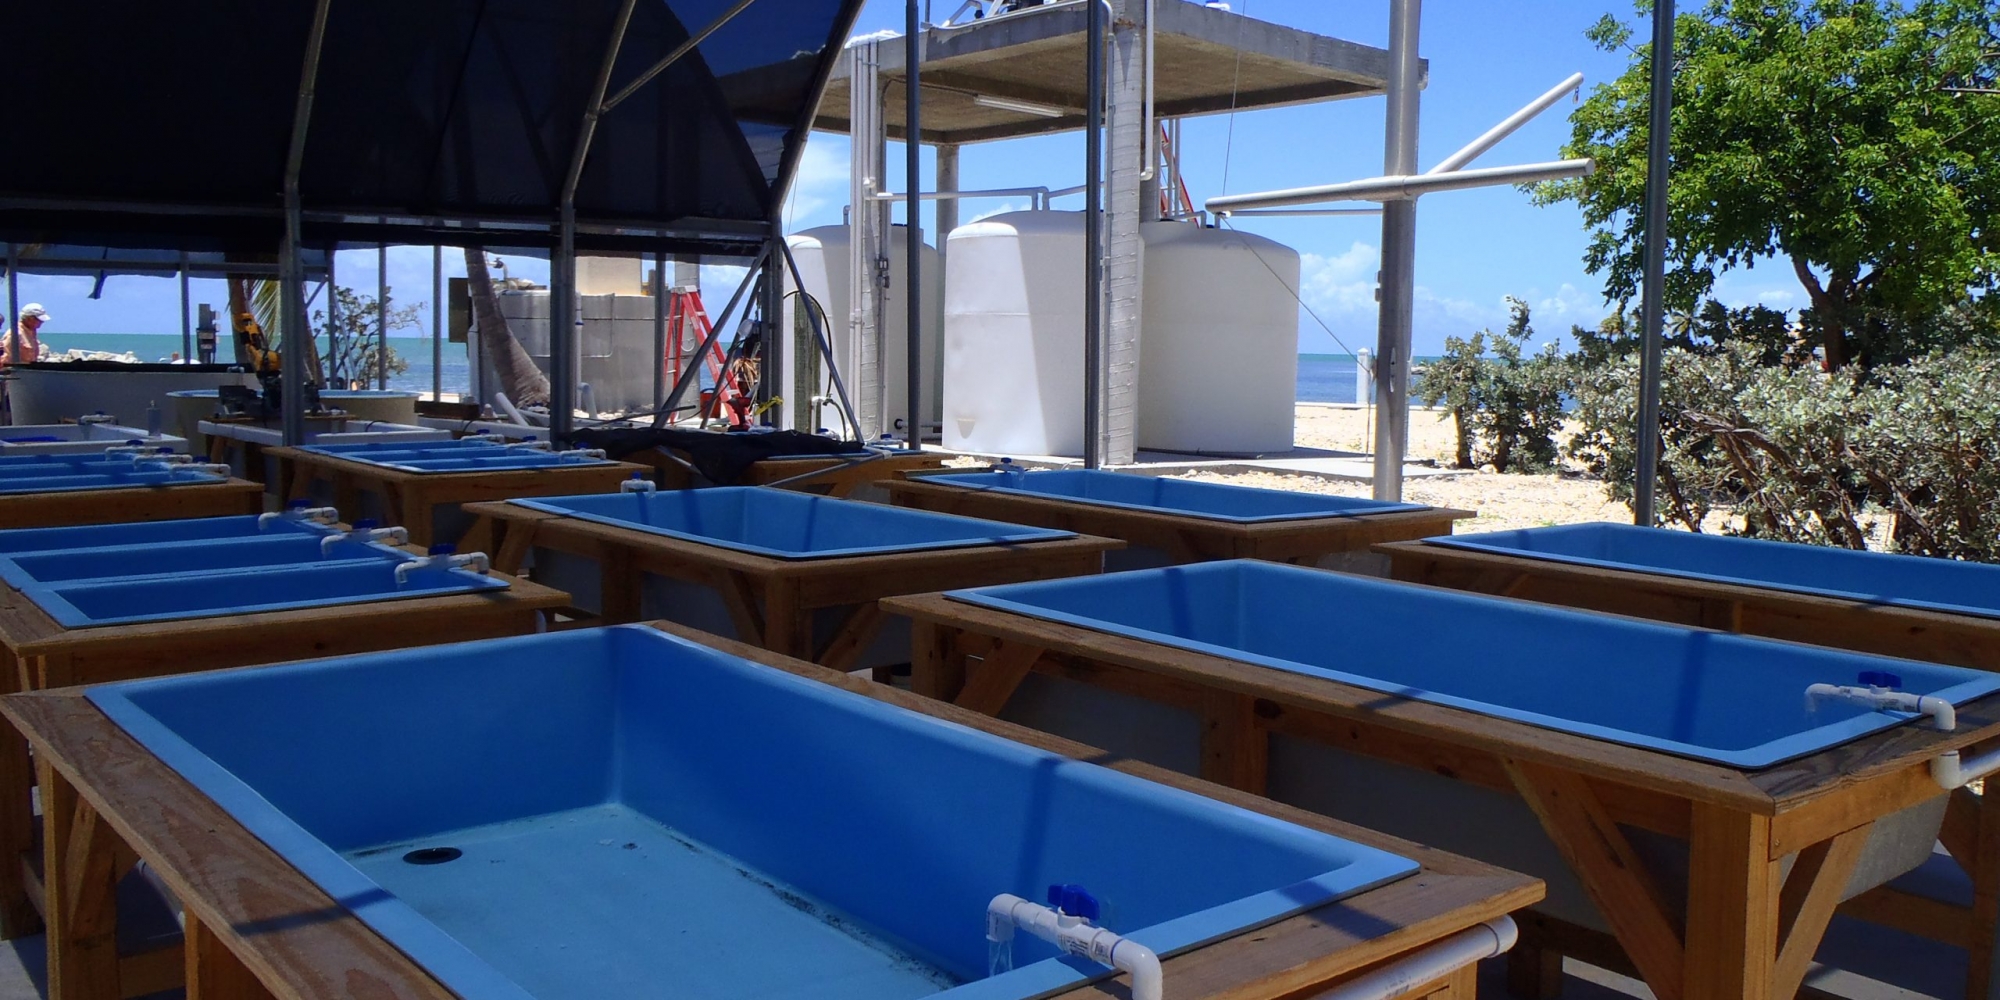 The state of the art Well Seawater System. Are its capabilities right for your next experiment?